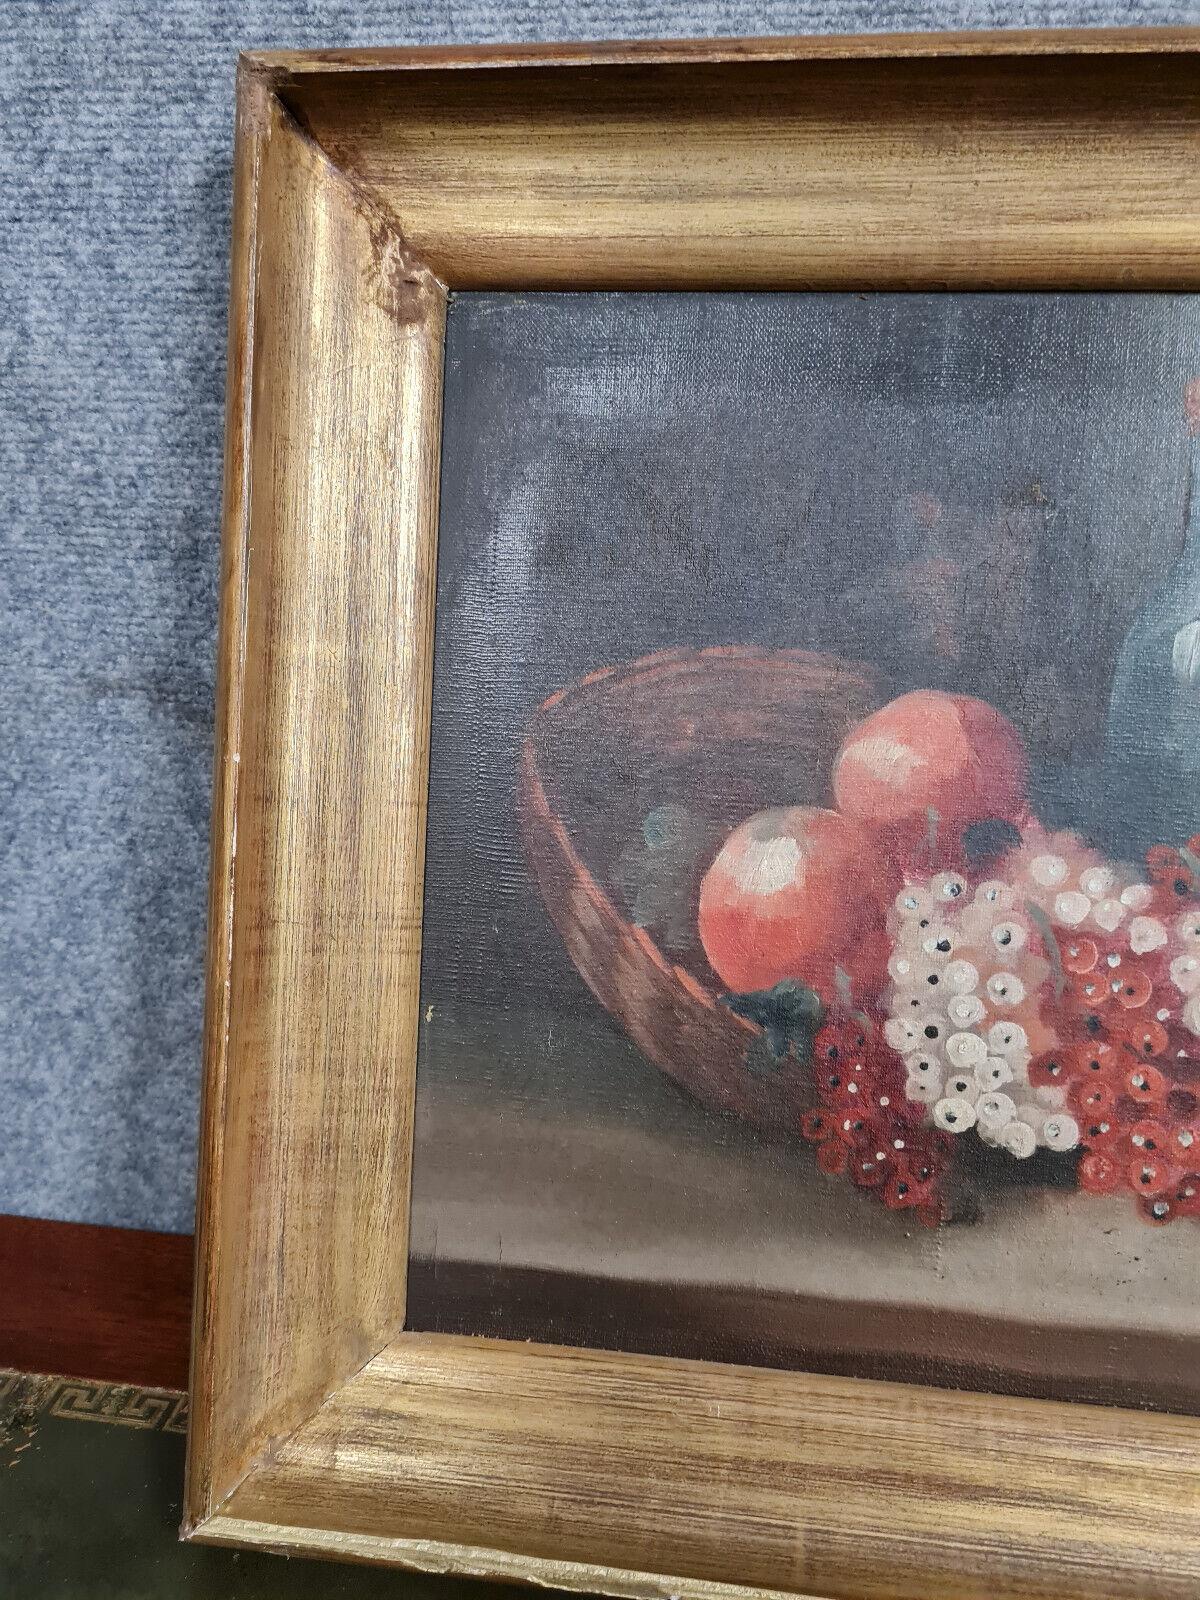 Step into the world of French artistry with this captivating still life oil painting from the late 19th to early 20th century. Signed by the artist LAMY in the bottom right corner, this piece captures the essence of traditional still life